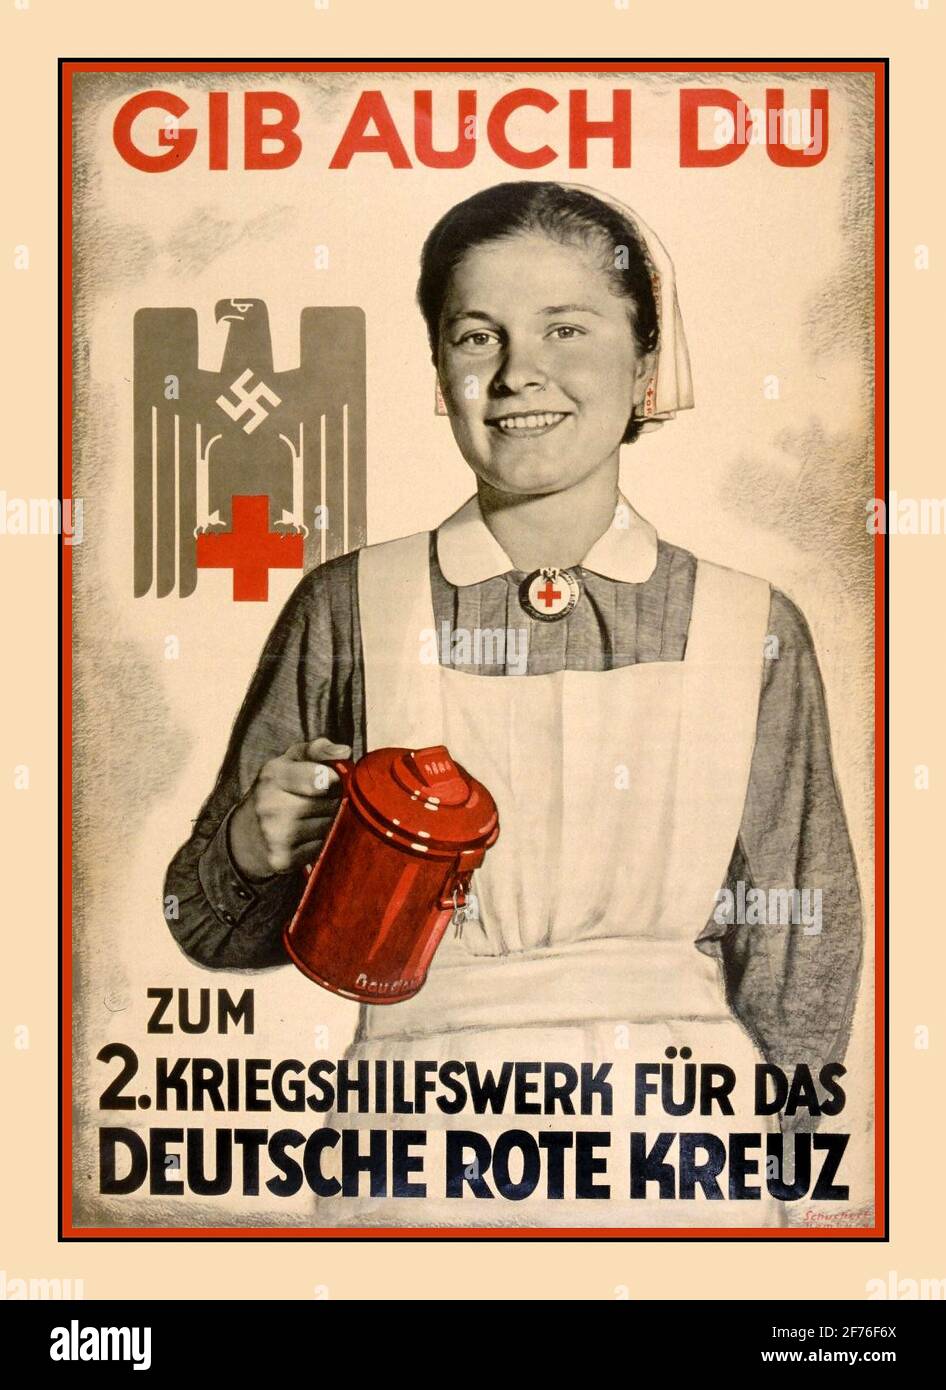 Nazi Germany 1940's Red Cross Promotion Poster by Schuchert, Hamburg for the Winterhilfswerk des Deutschen Volkes (WHW), an annual drive in Nazi Germany by the National Socialist People's Welfare (German: en:Nationalsozialistische Volkswohlfahrt) to help finance charitable work, promoting a WW2 1941 German Red Cross campaign. Date1941 Stock Photo